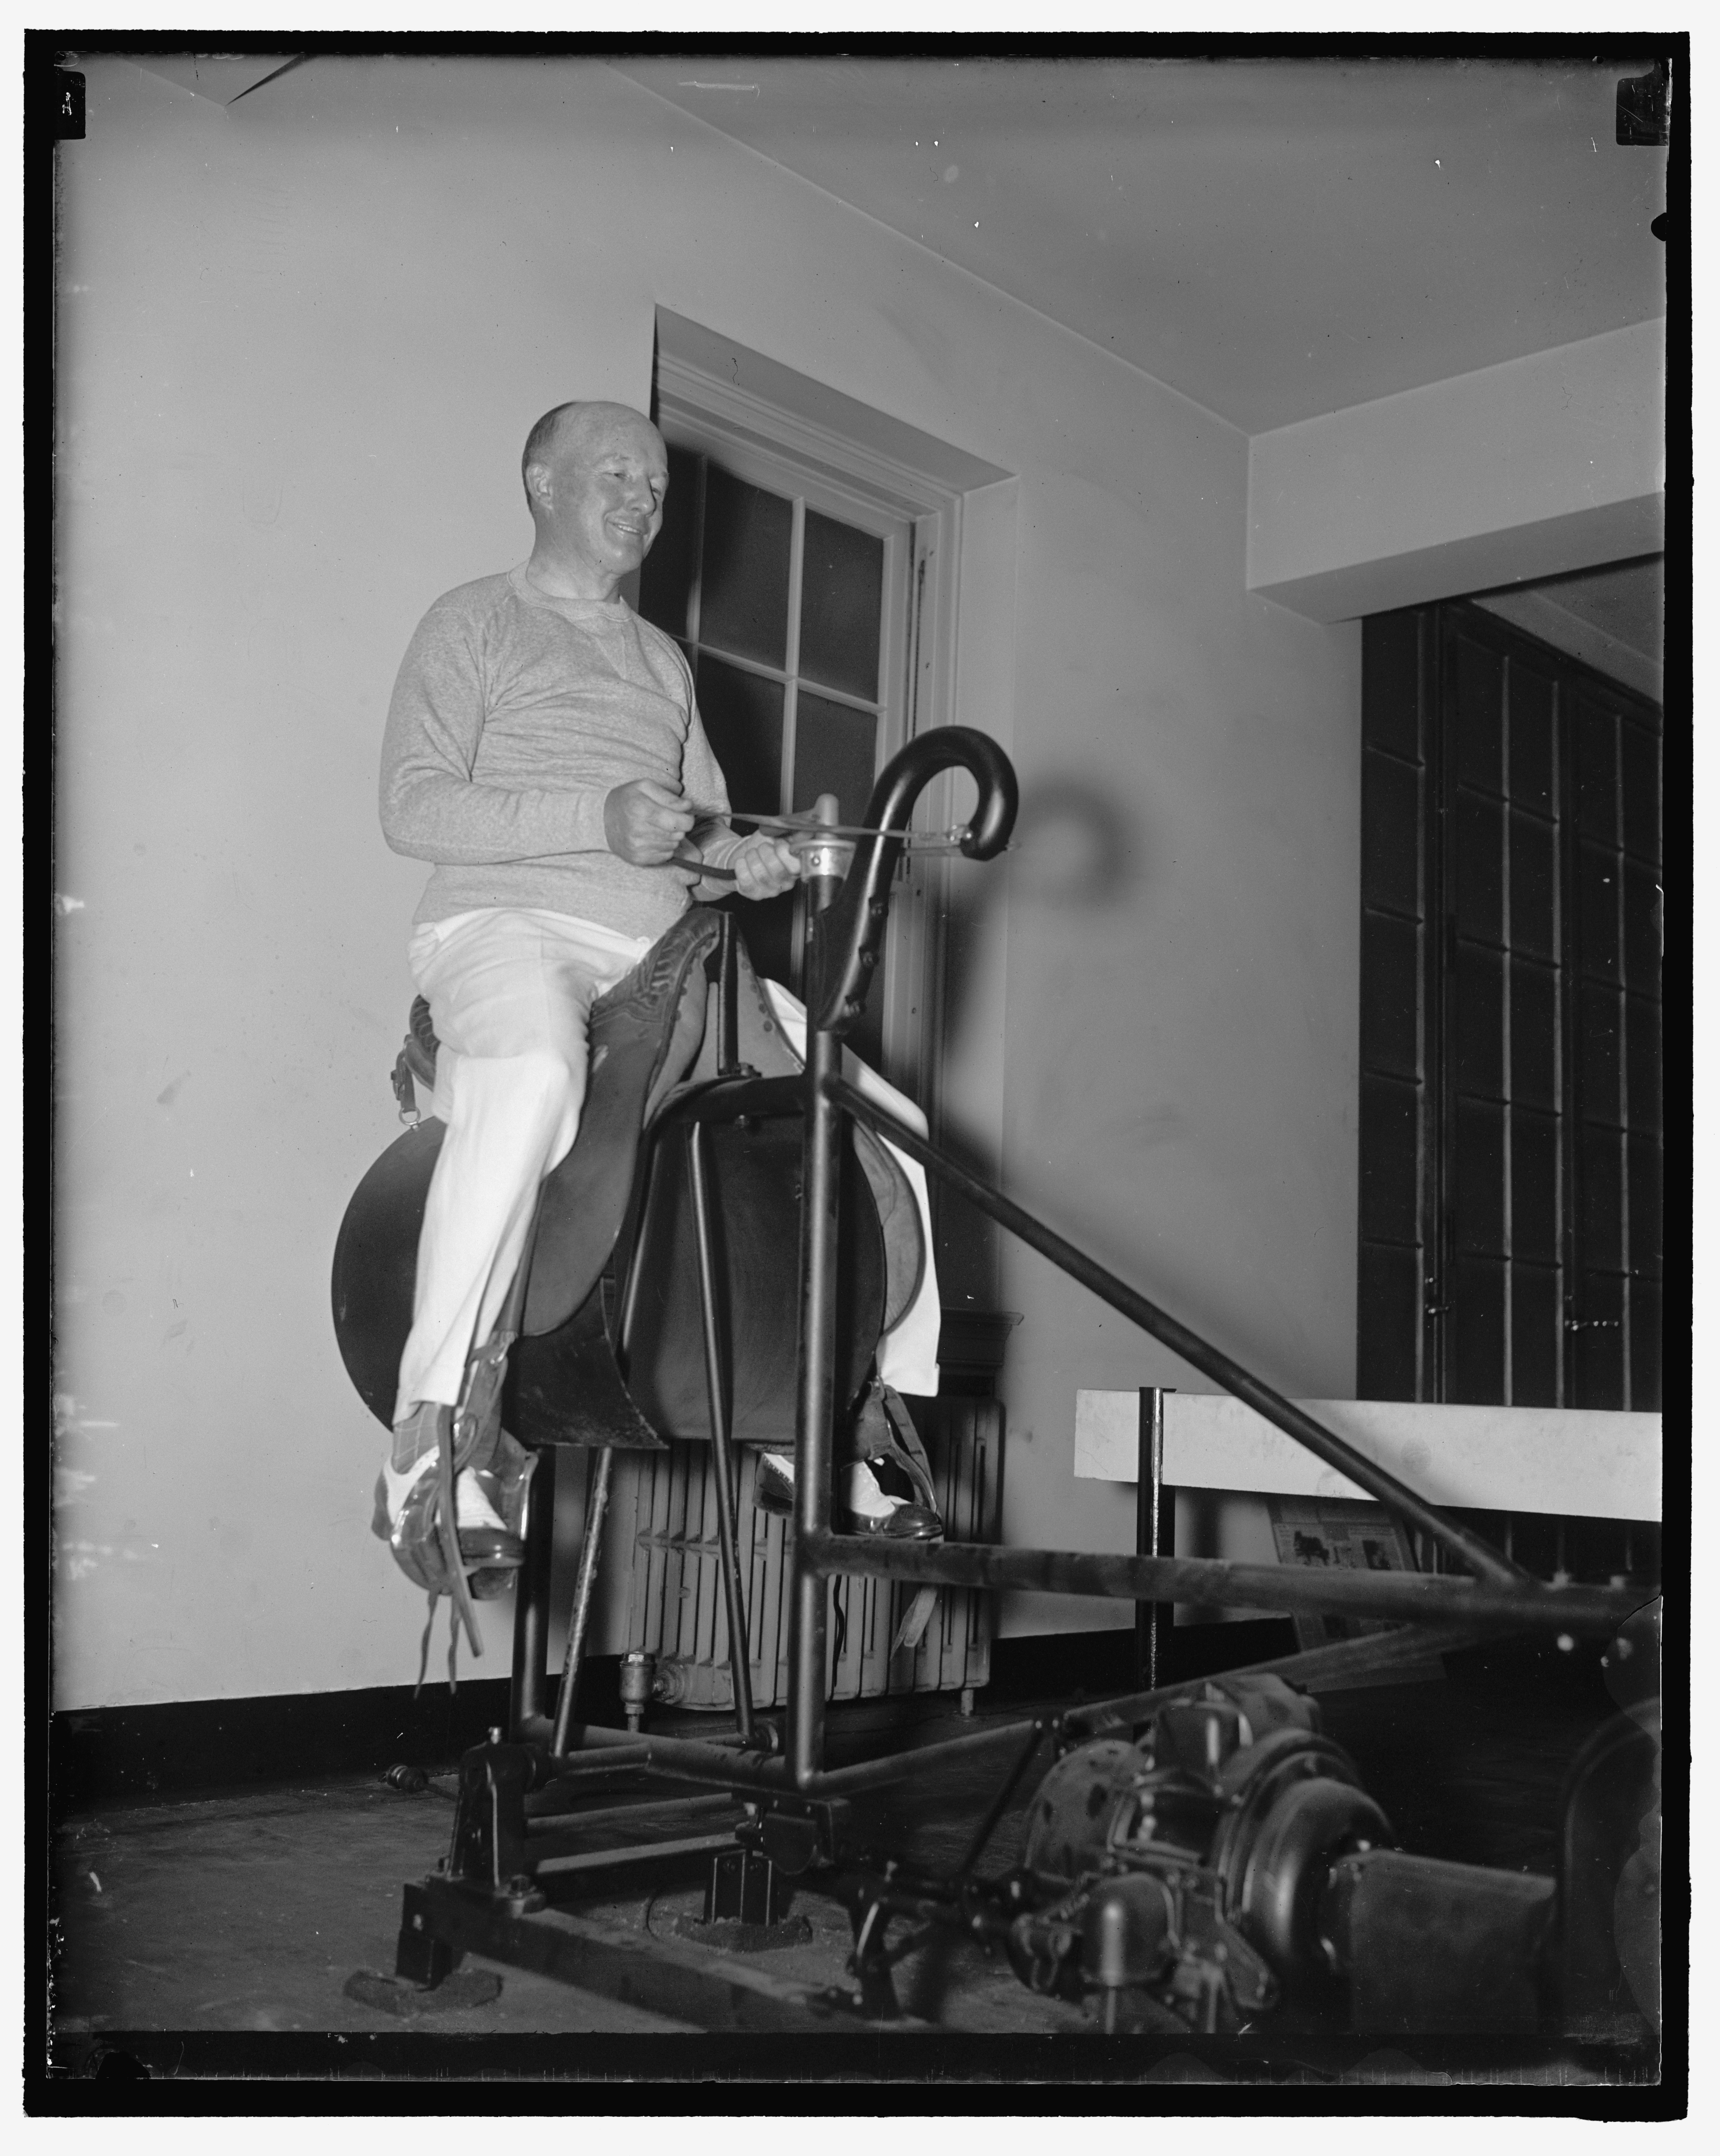 A man rides an electric horse machine at a gym in 1937.